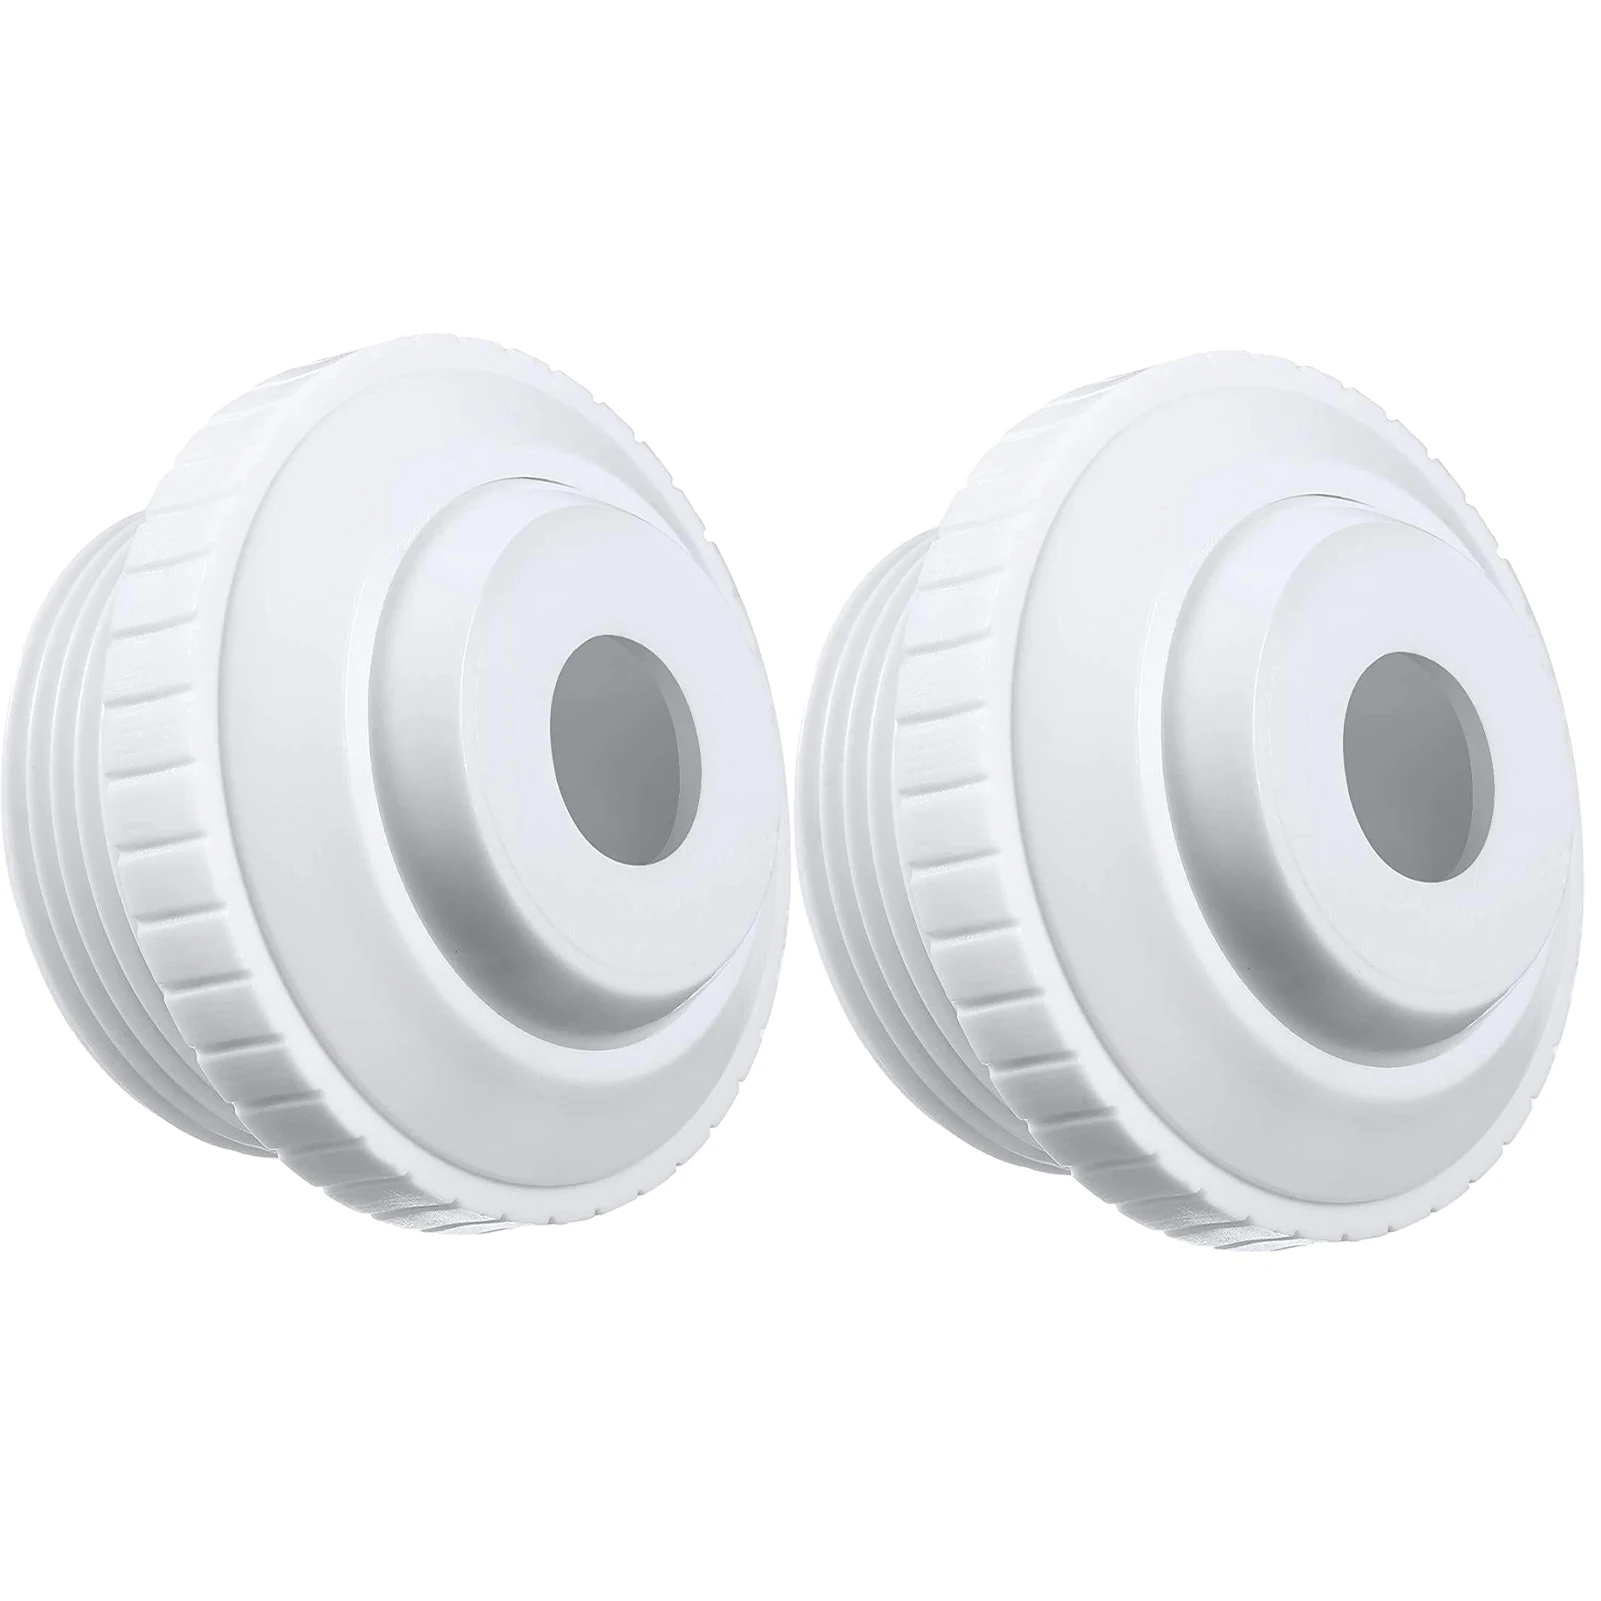 

2pcs Practical Spa Safety Thread Eyeball Inlet Pool Jet Nozzles For Cleaning Directional Flow Durable Wear Resistant Convenient